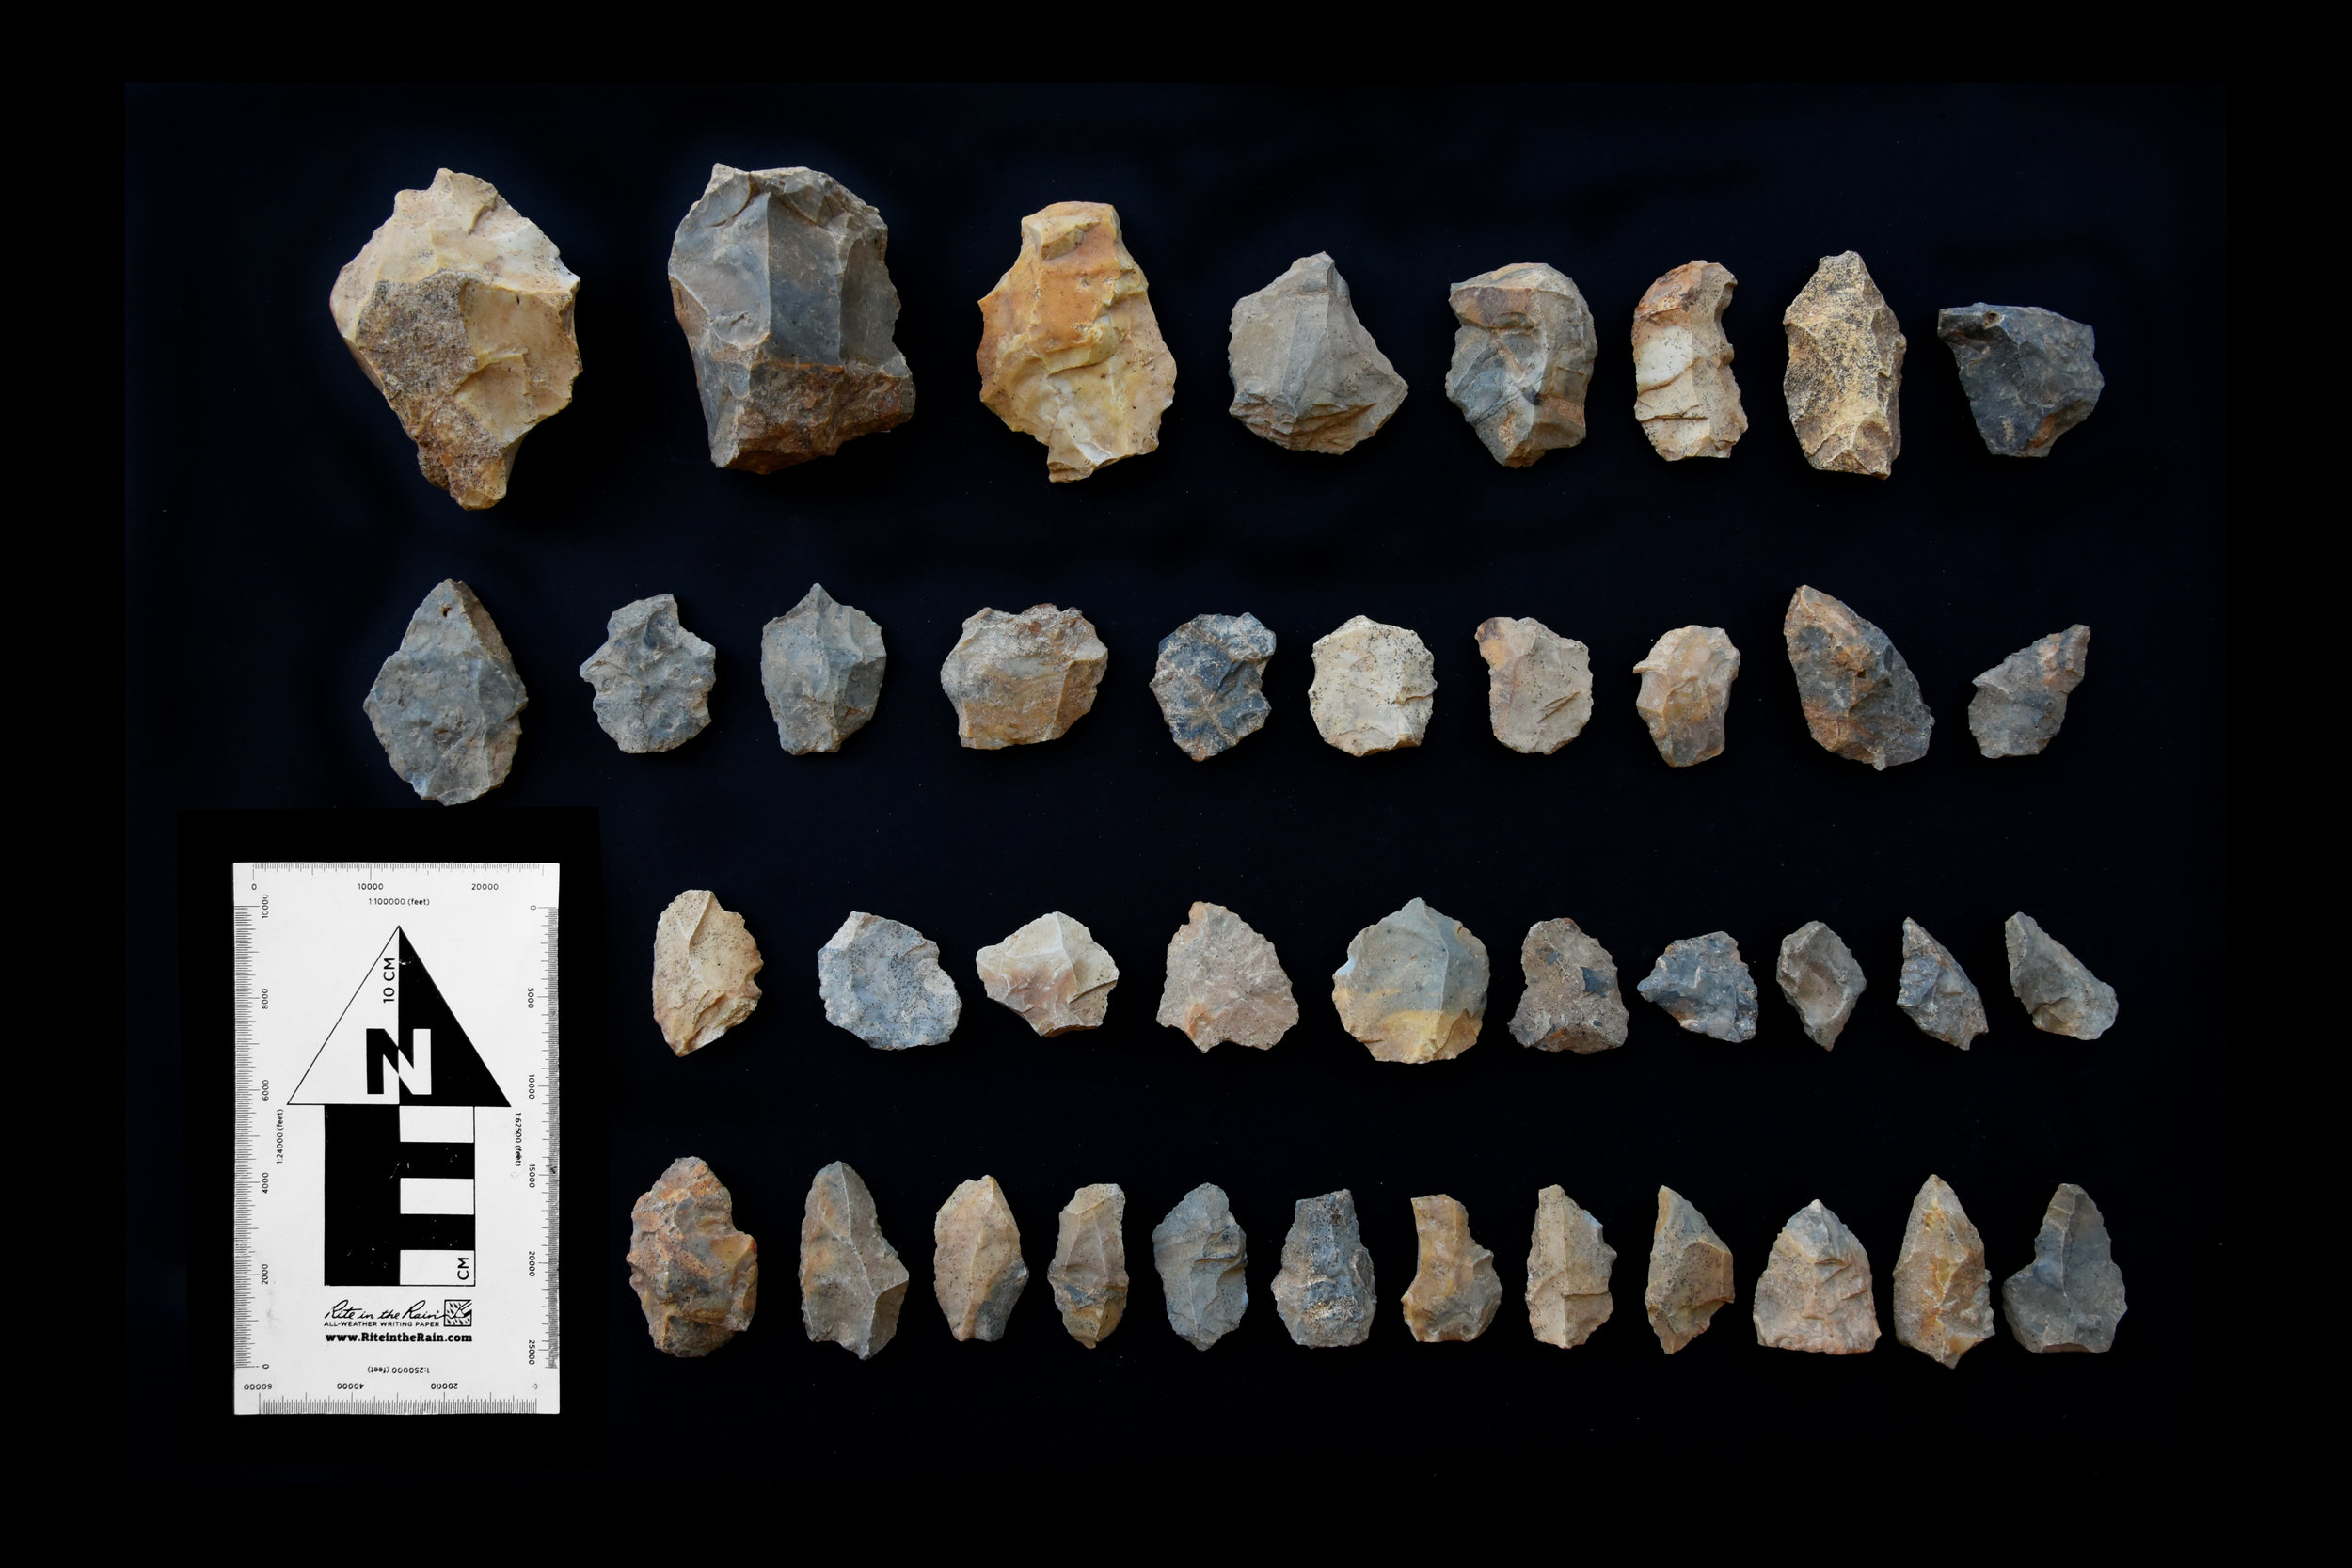 Copy of Middle Palaeolithic cores and flake tools